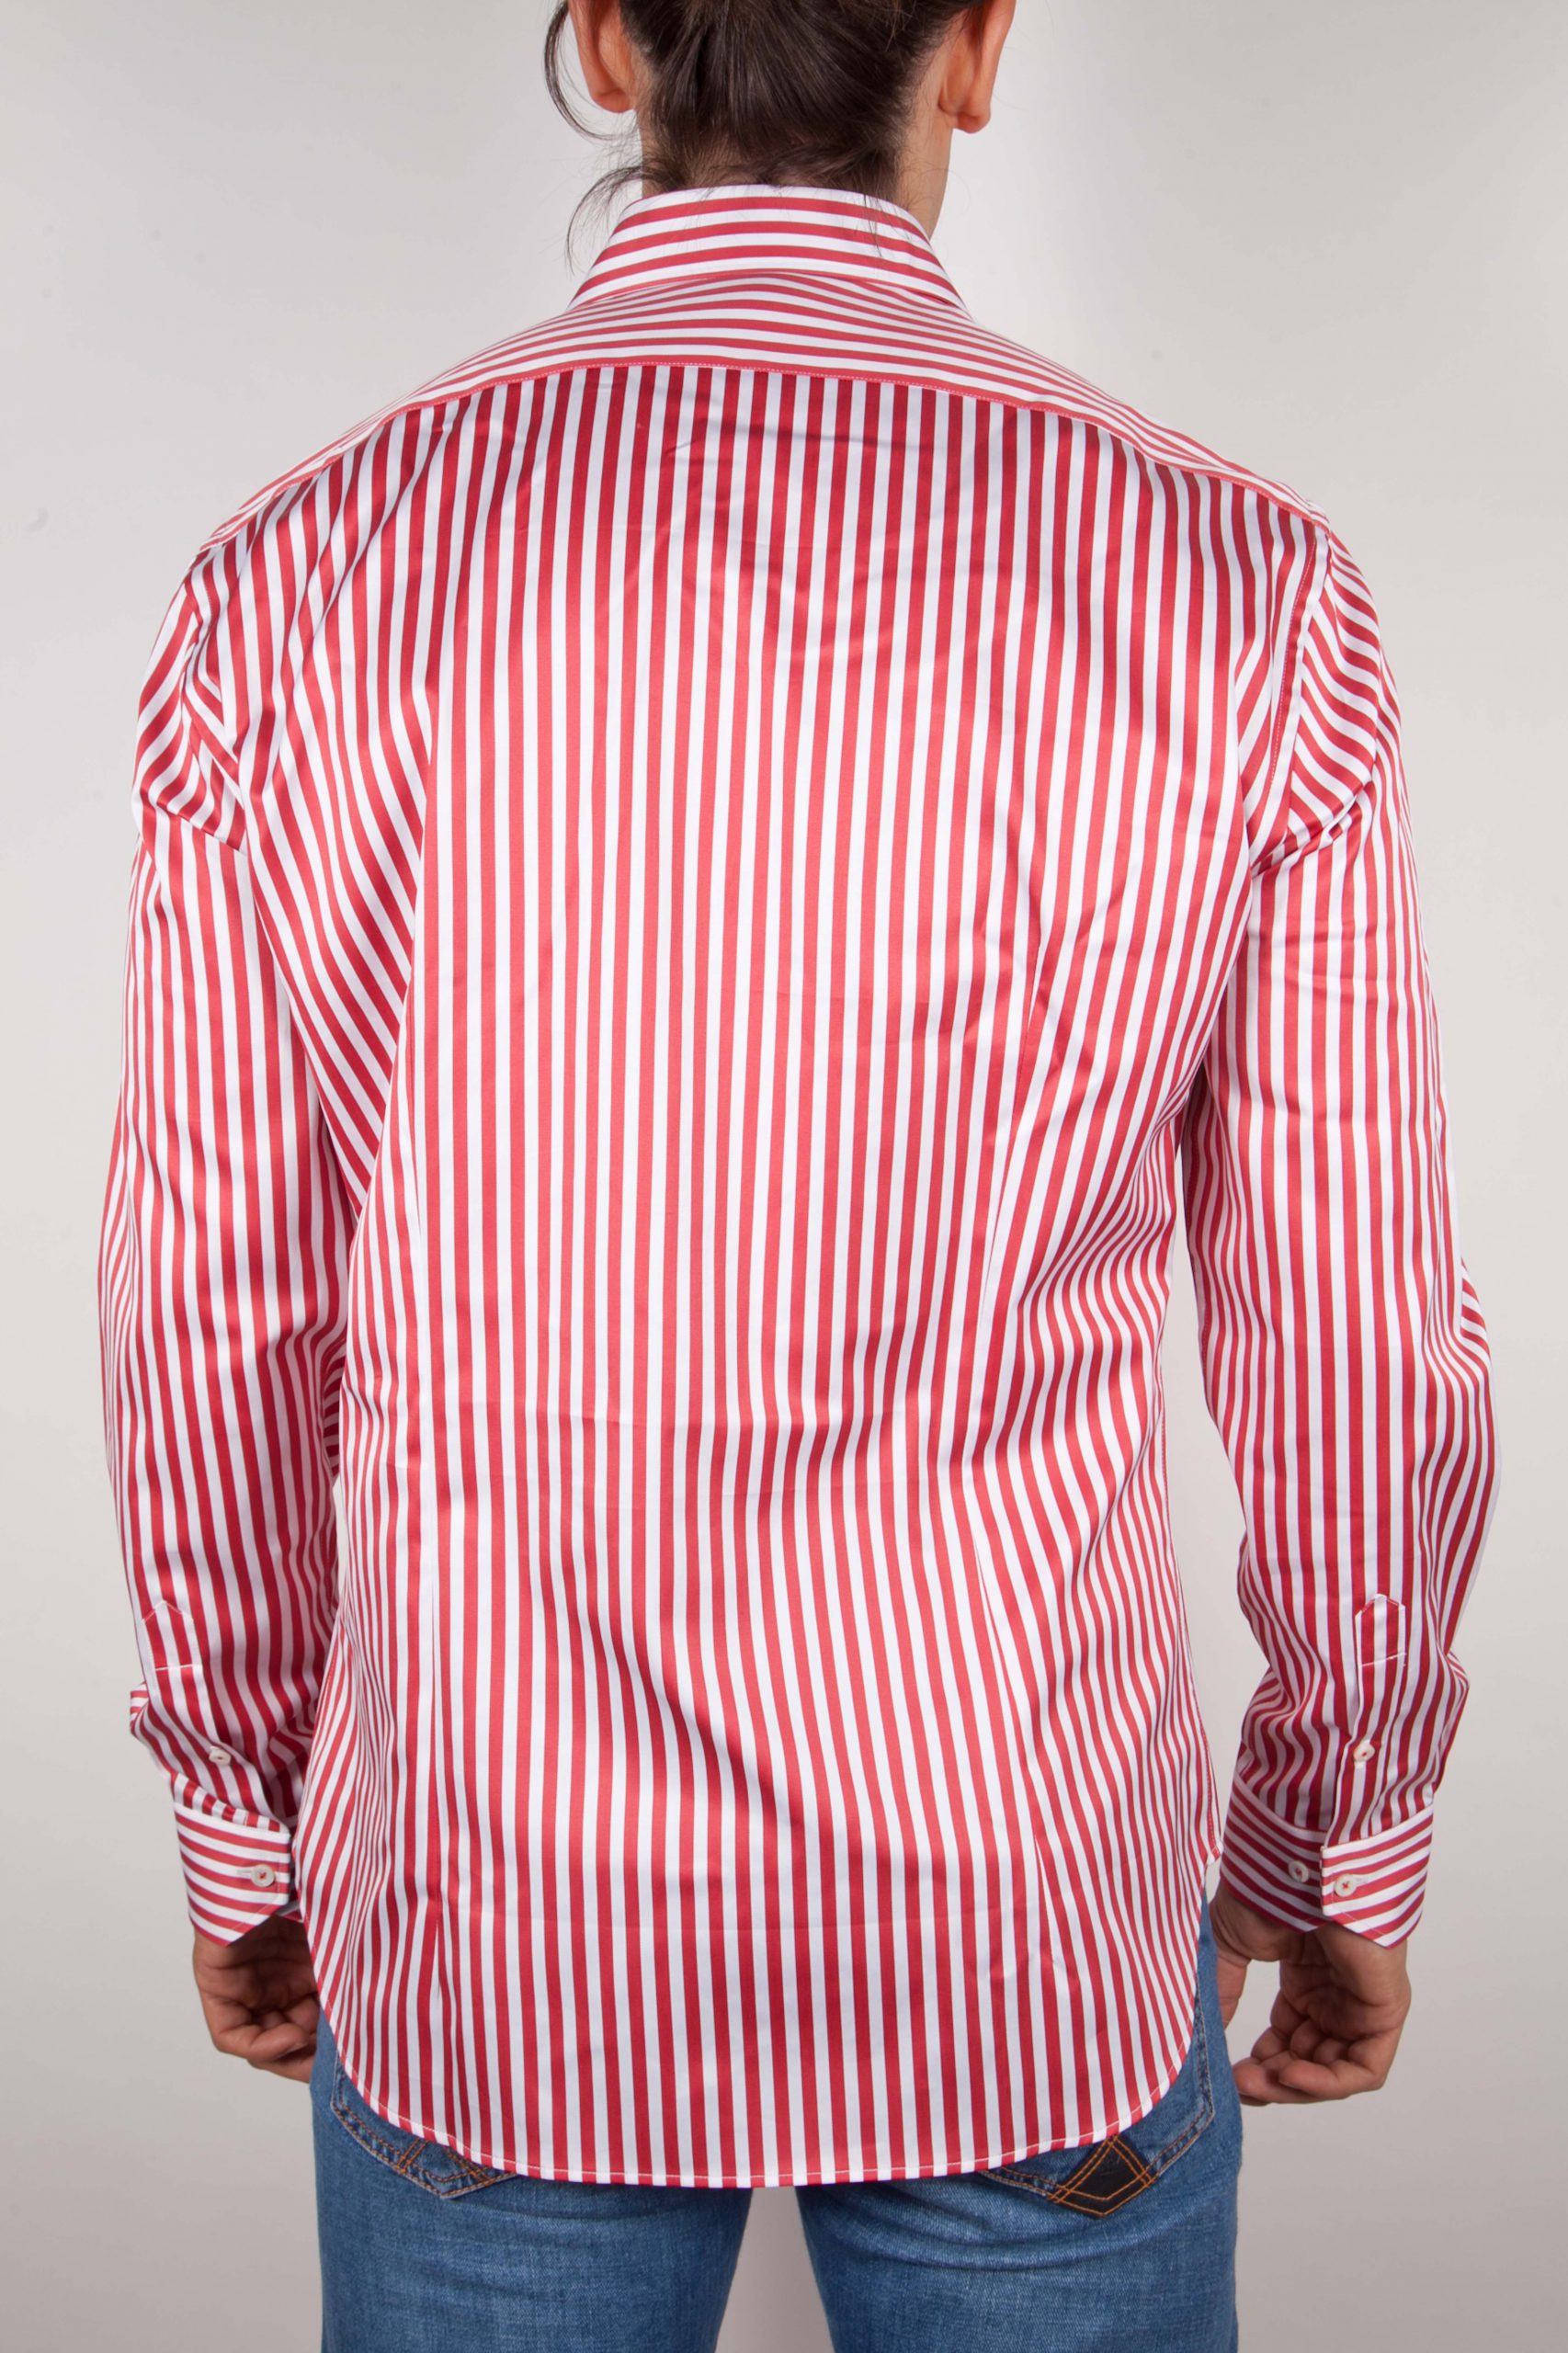 Shirt with blue and white lines - Poggianti camicie